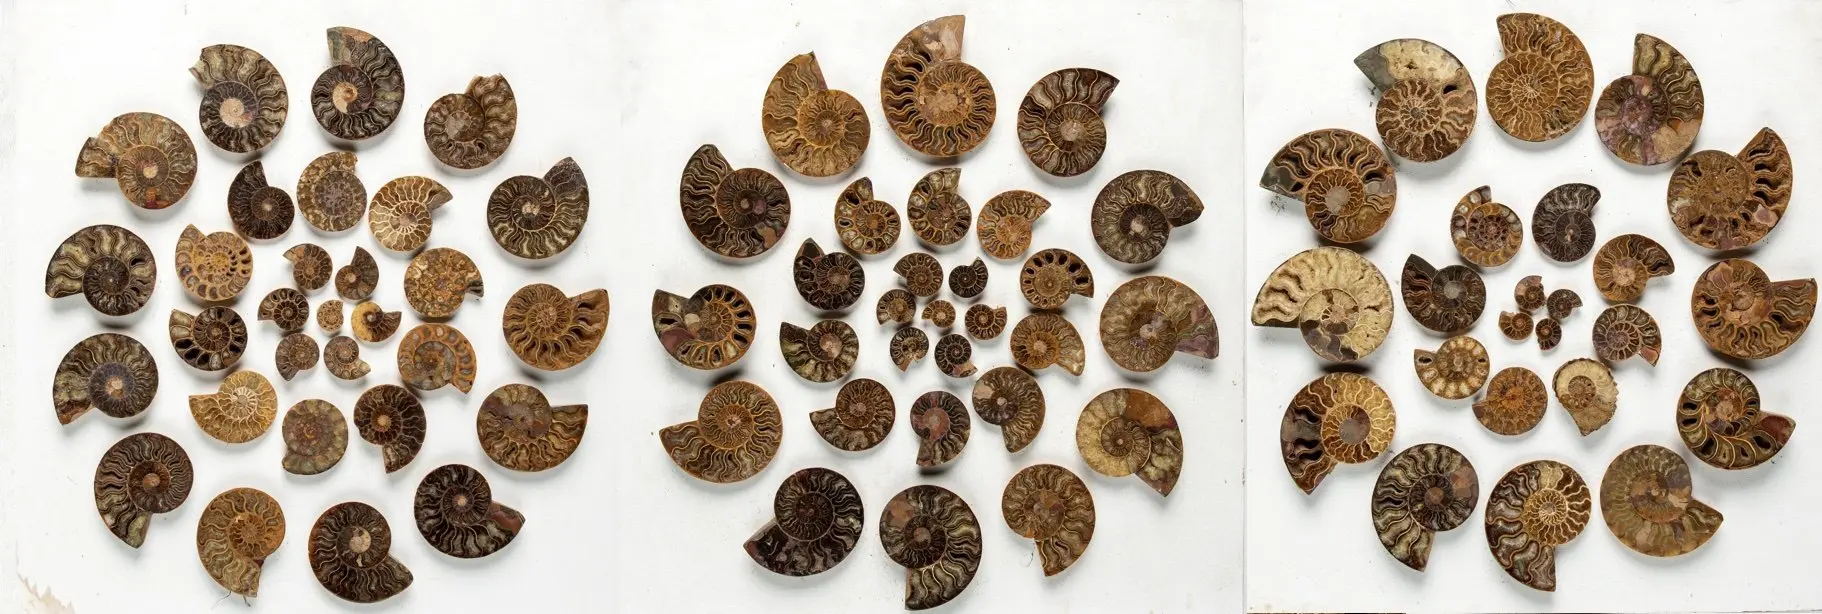 A collection of ammonite halves mounted on three boards